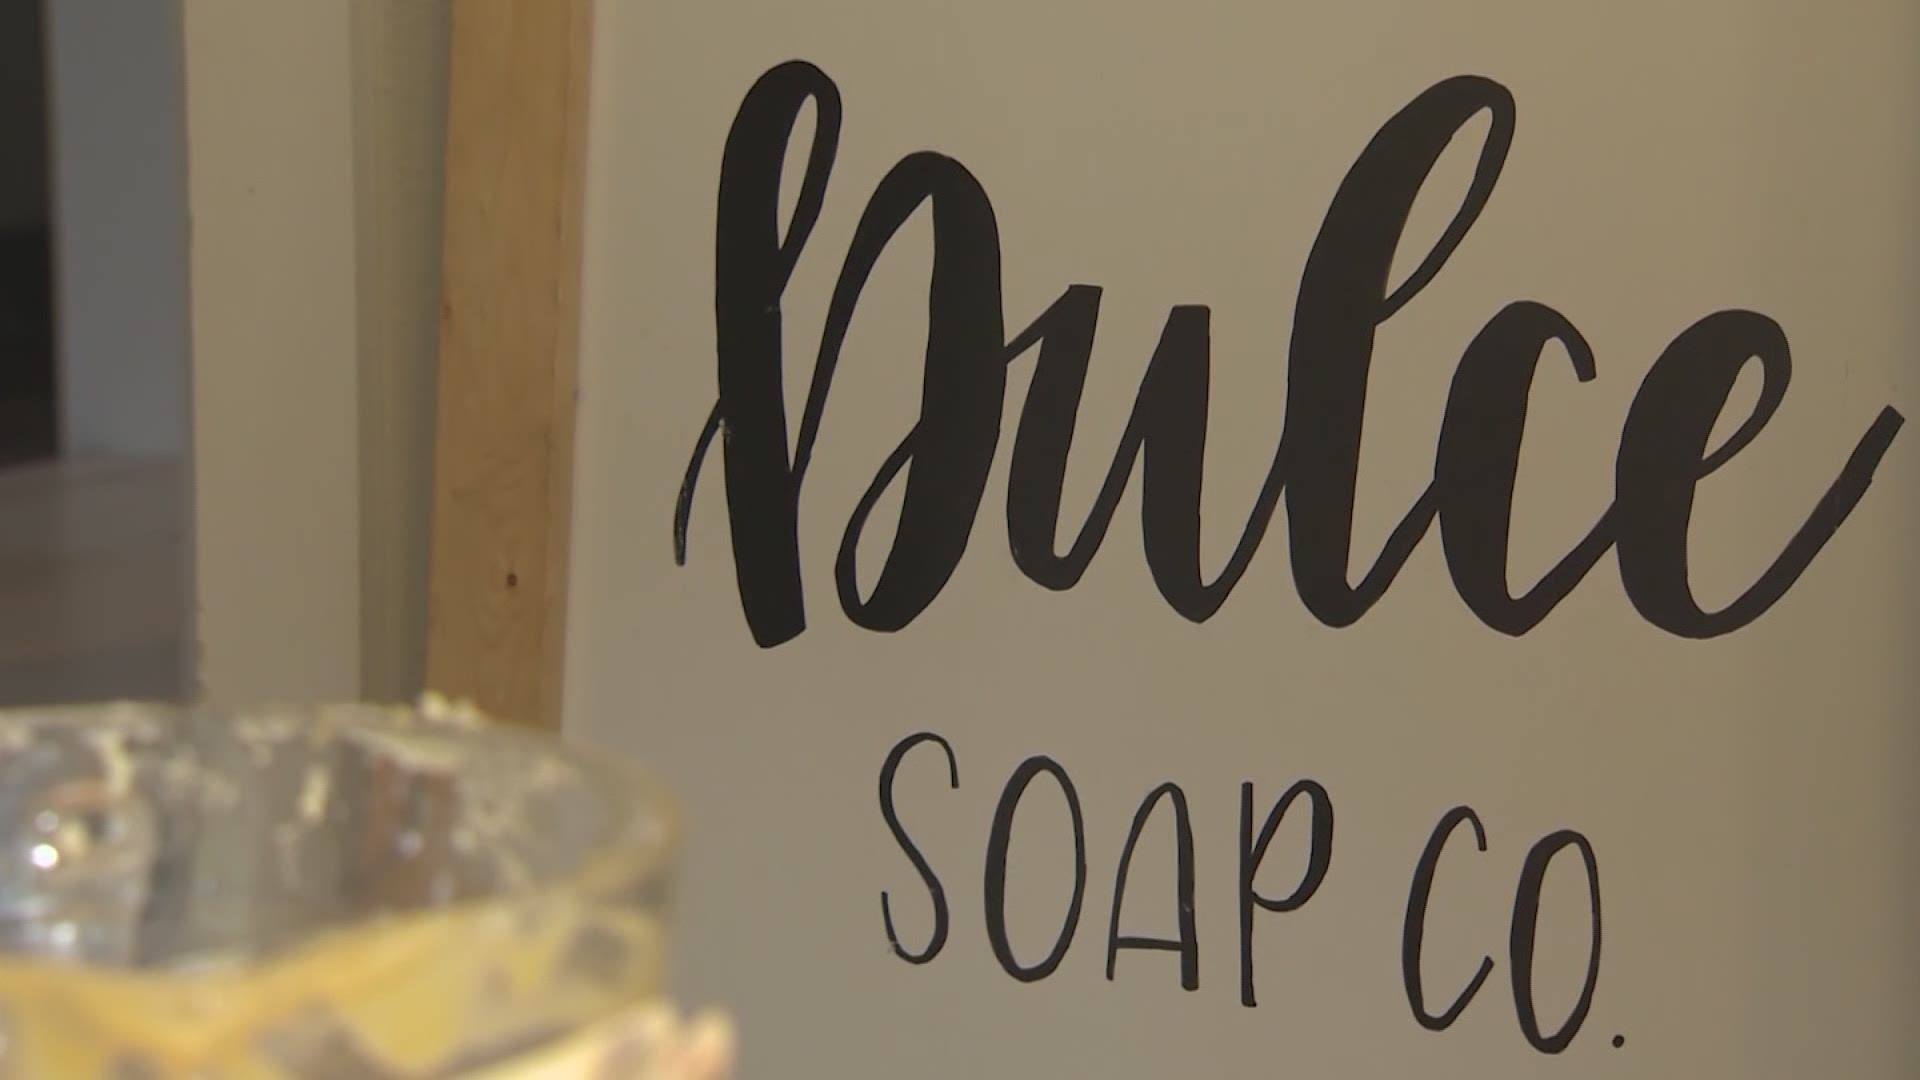 A business starts out on her own and ends up with a thriving soap company in this week's Made in SA.